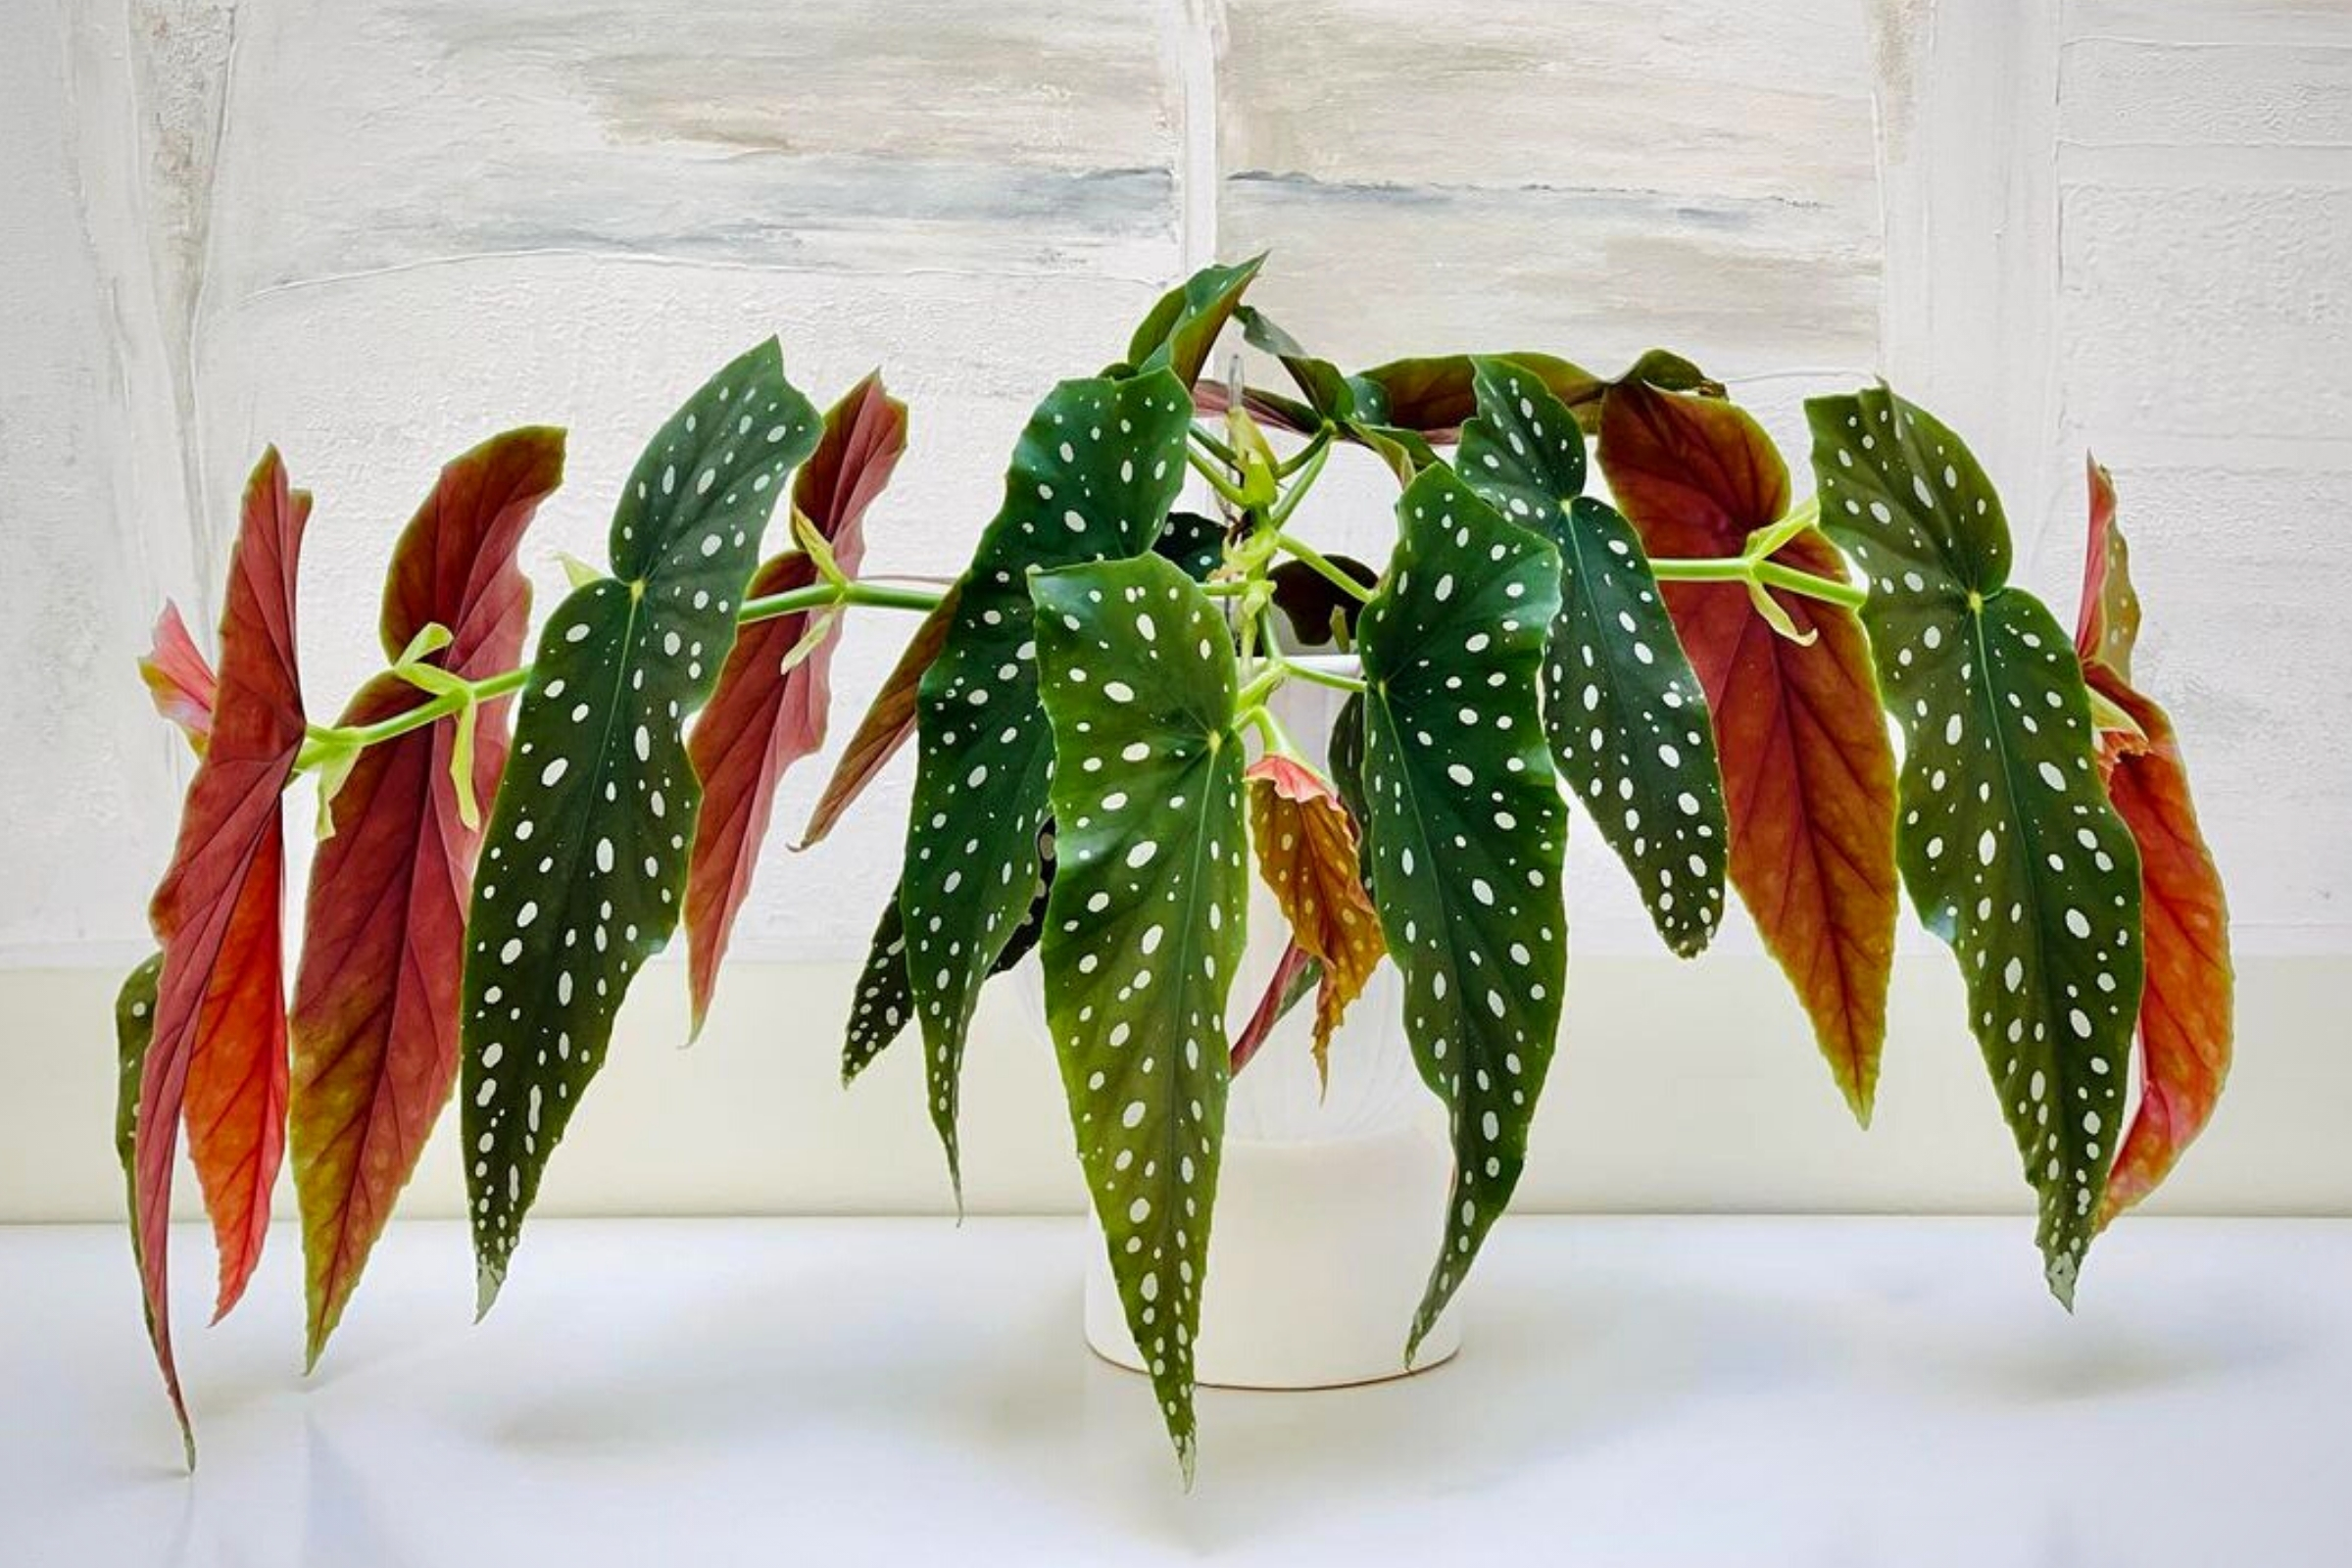 Polka Dot Begonia Is One of the Most Photogenic Houseplants - Article on Thursd